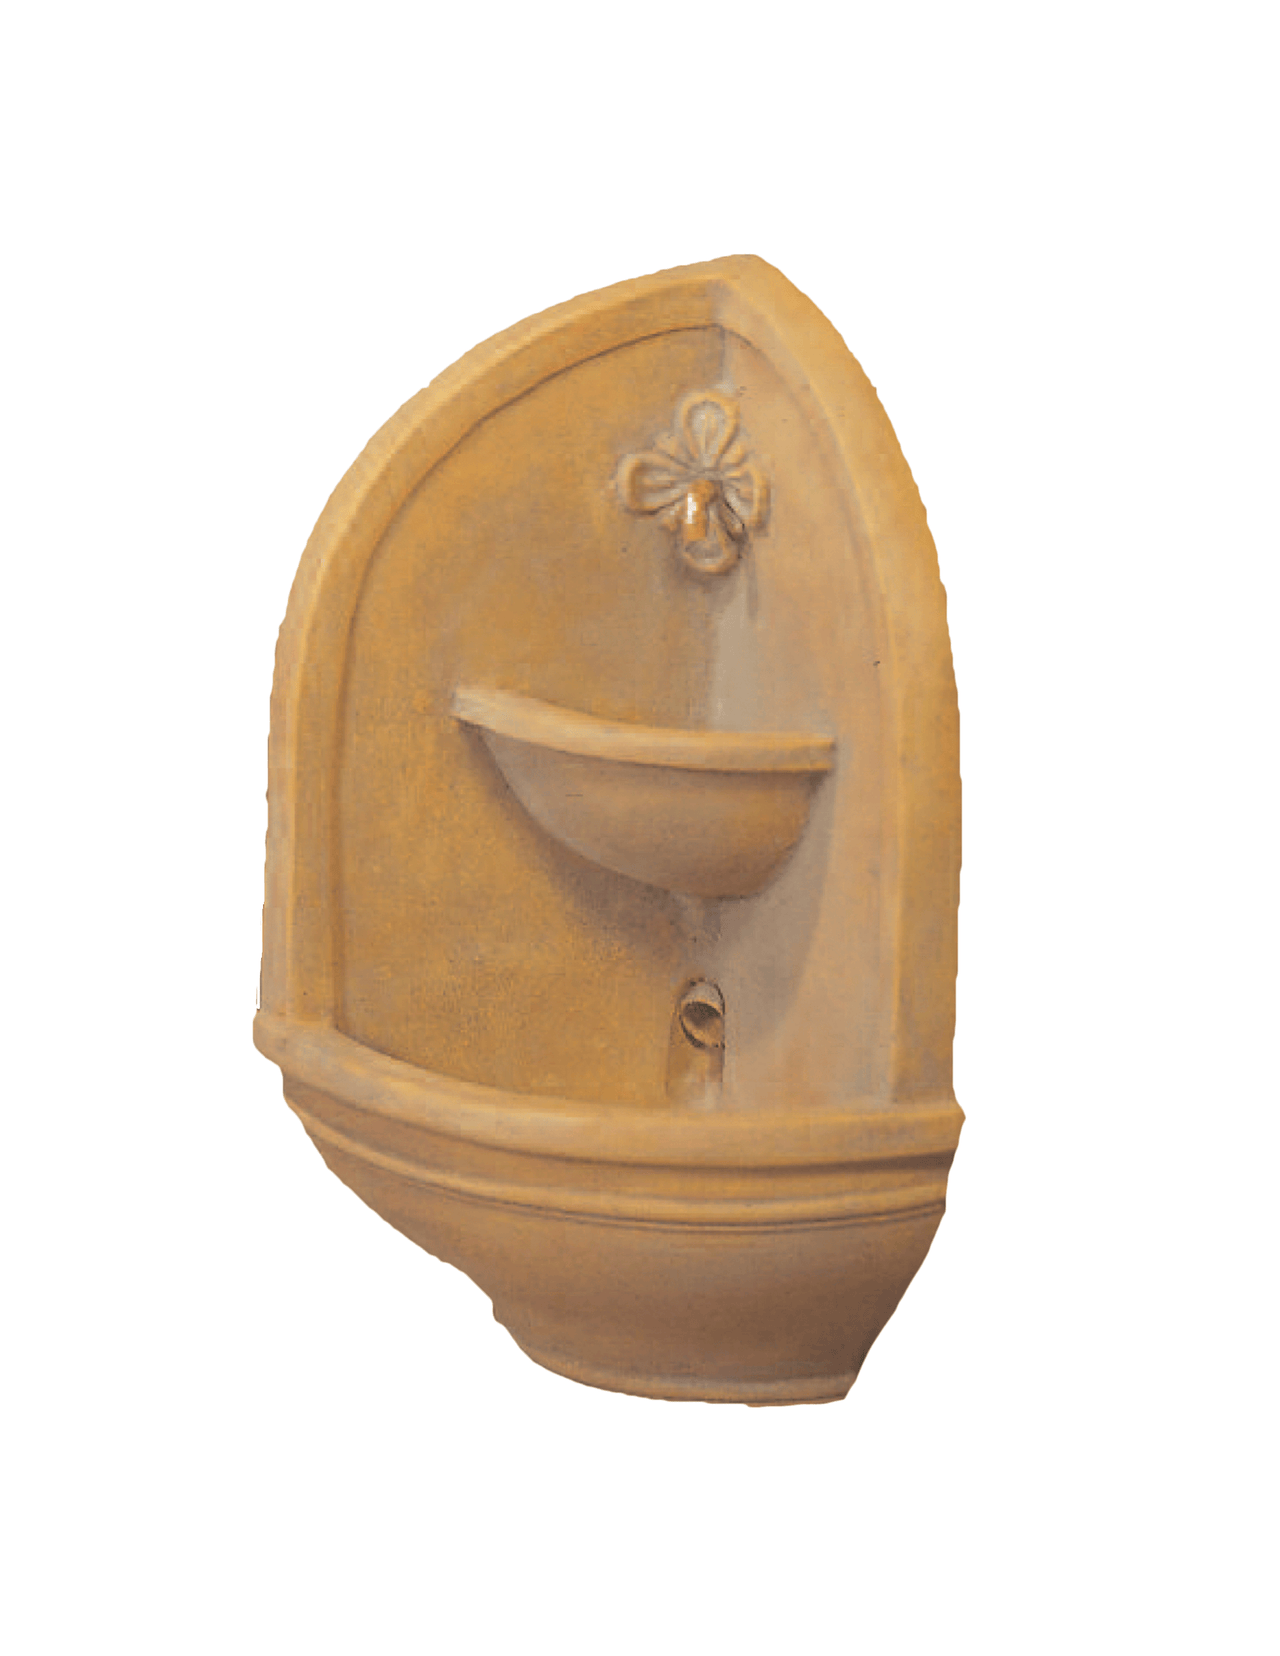 Tuscan Corner Wall Cast Stone Outdoor Garden Fountains With Spout Fountain Tuscan 